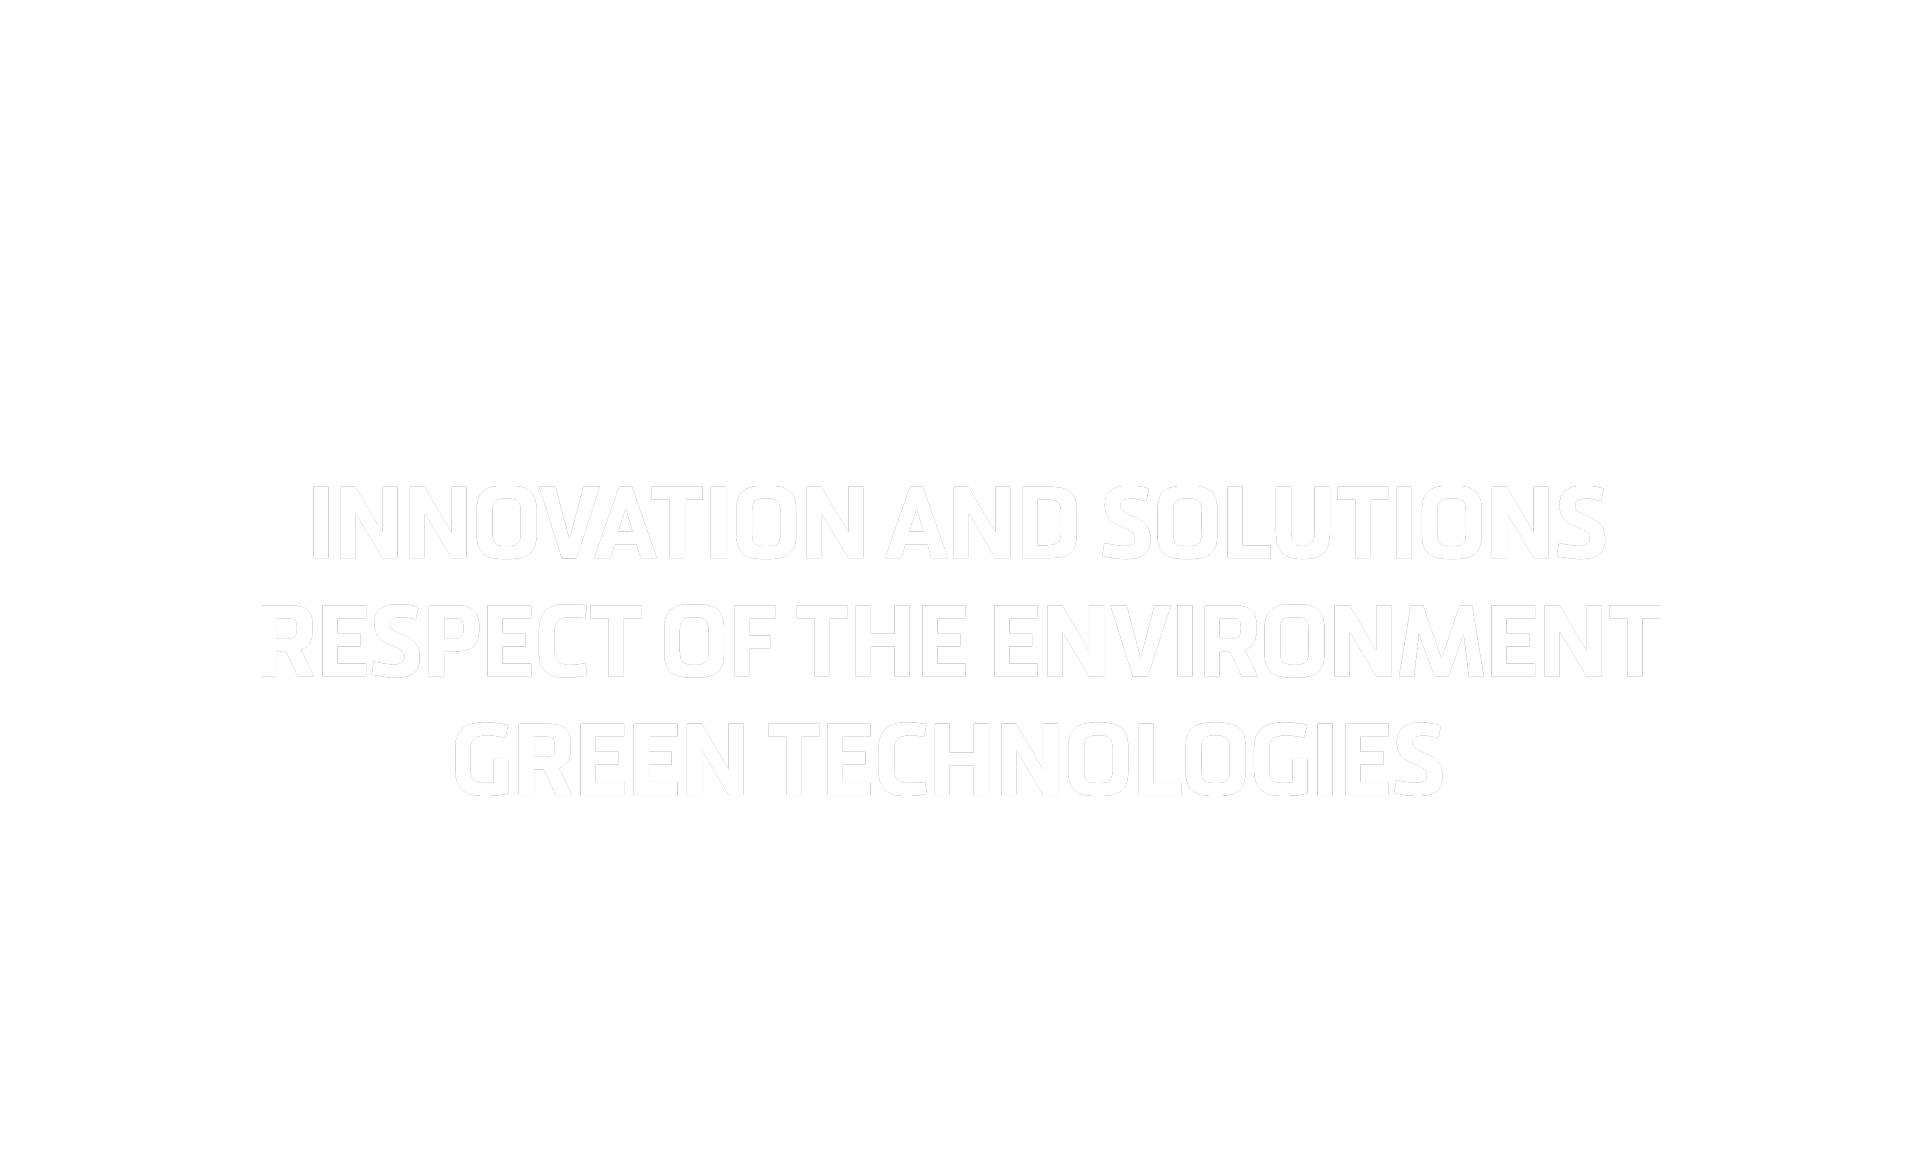 Innovation and solutions, respect of the environment and green technologies